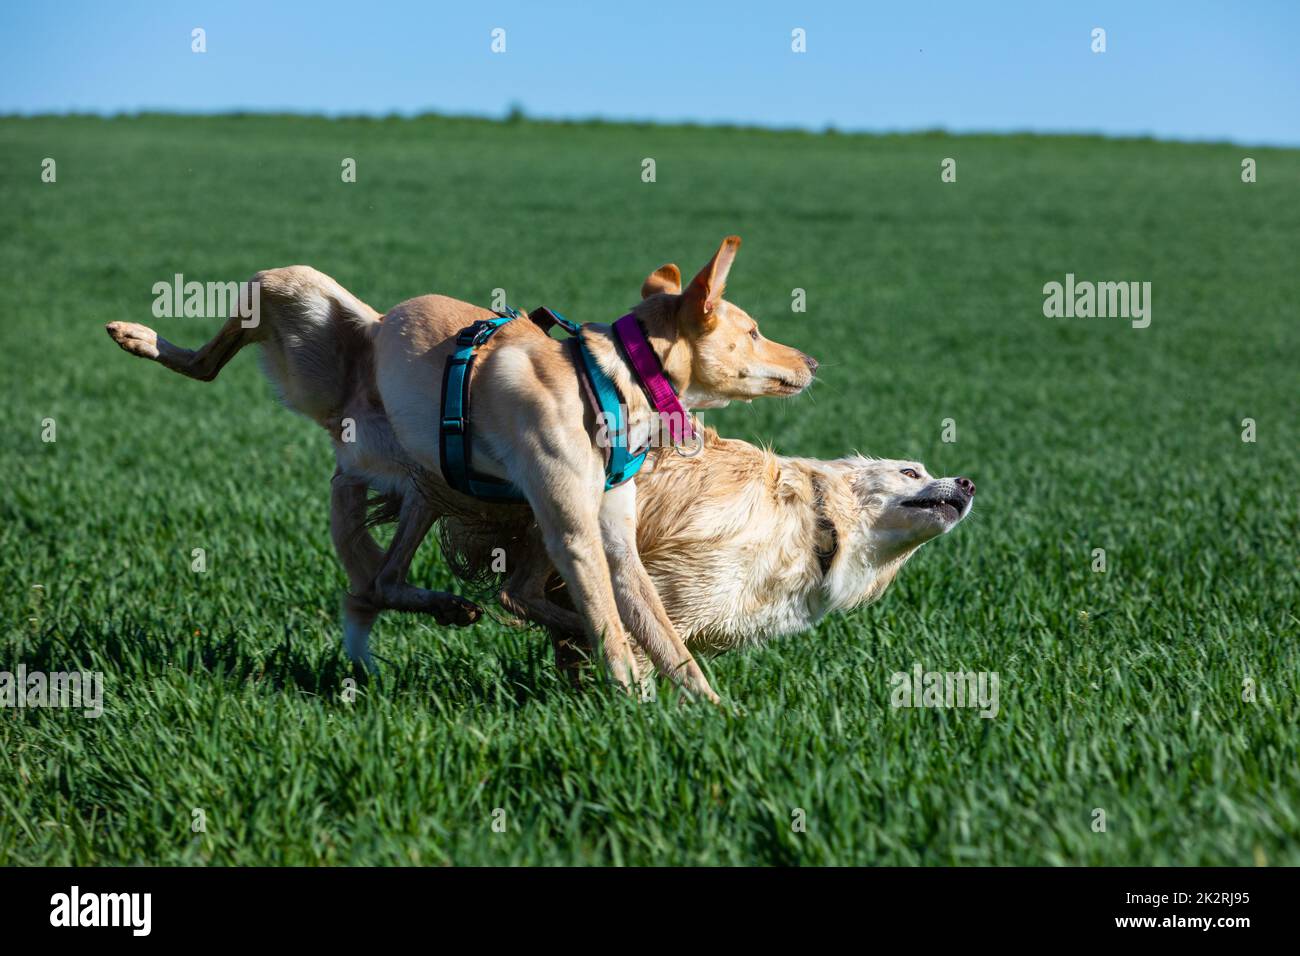 wild playing of two dogs in a green field Stock Photo